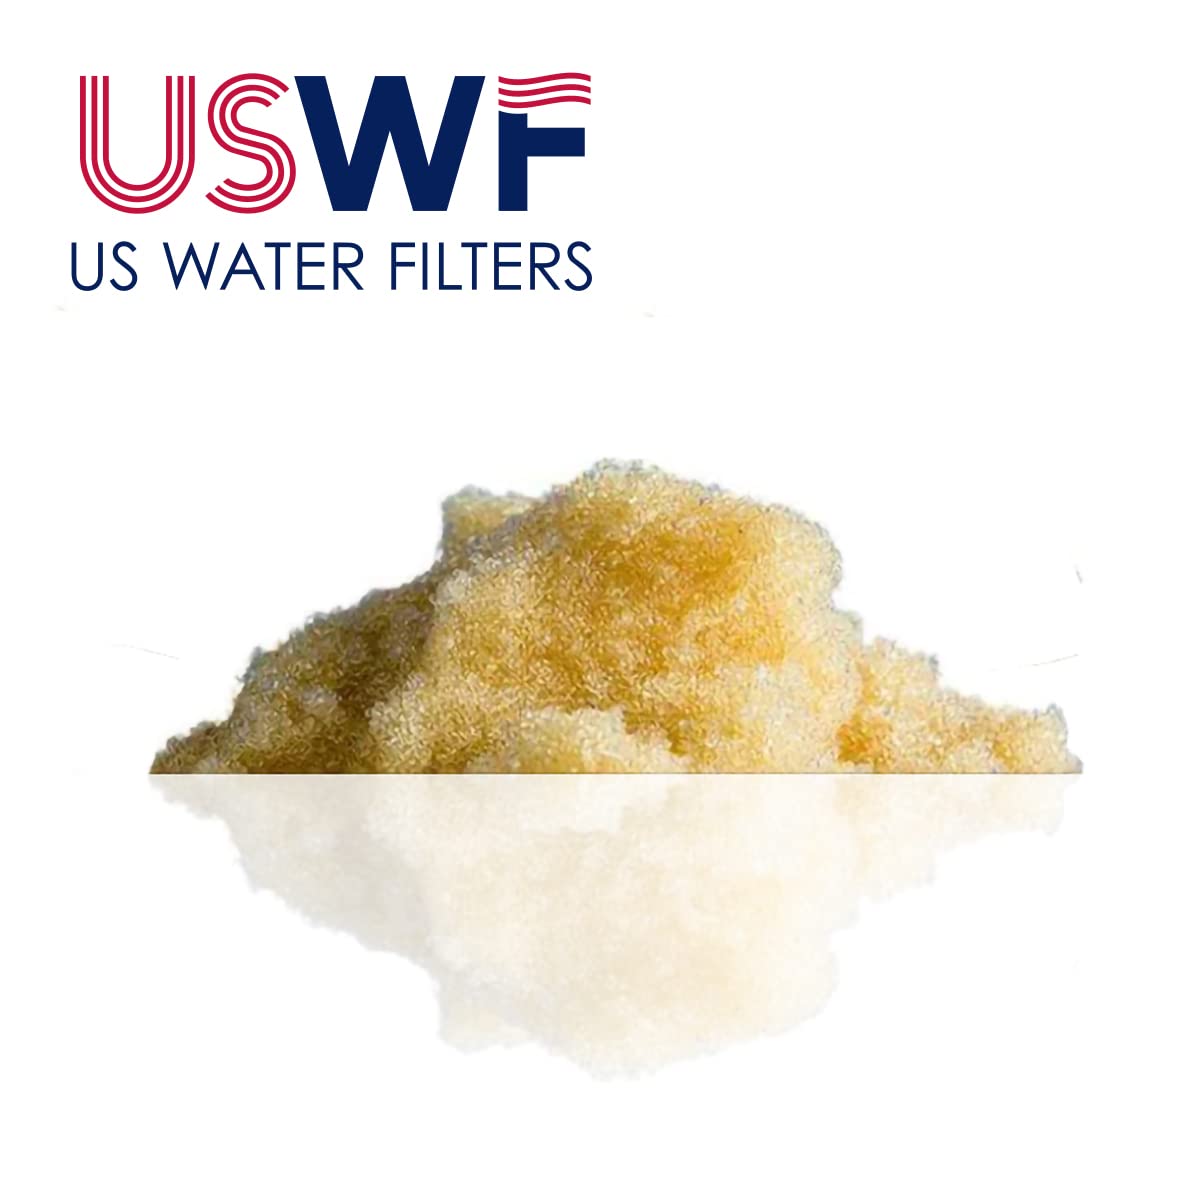 USWF-8P-25lbs Ion Exchange Water Softener Resin - 0.5 Cubic Foot - Single Bag - Ideal for Residential or Commercial Use - Reduces Soap Scum and Limescale